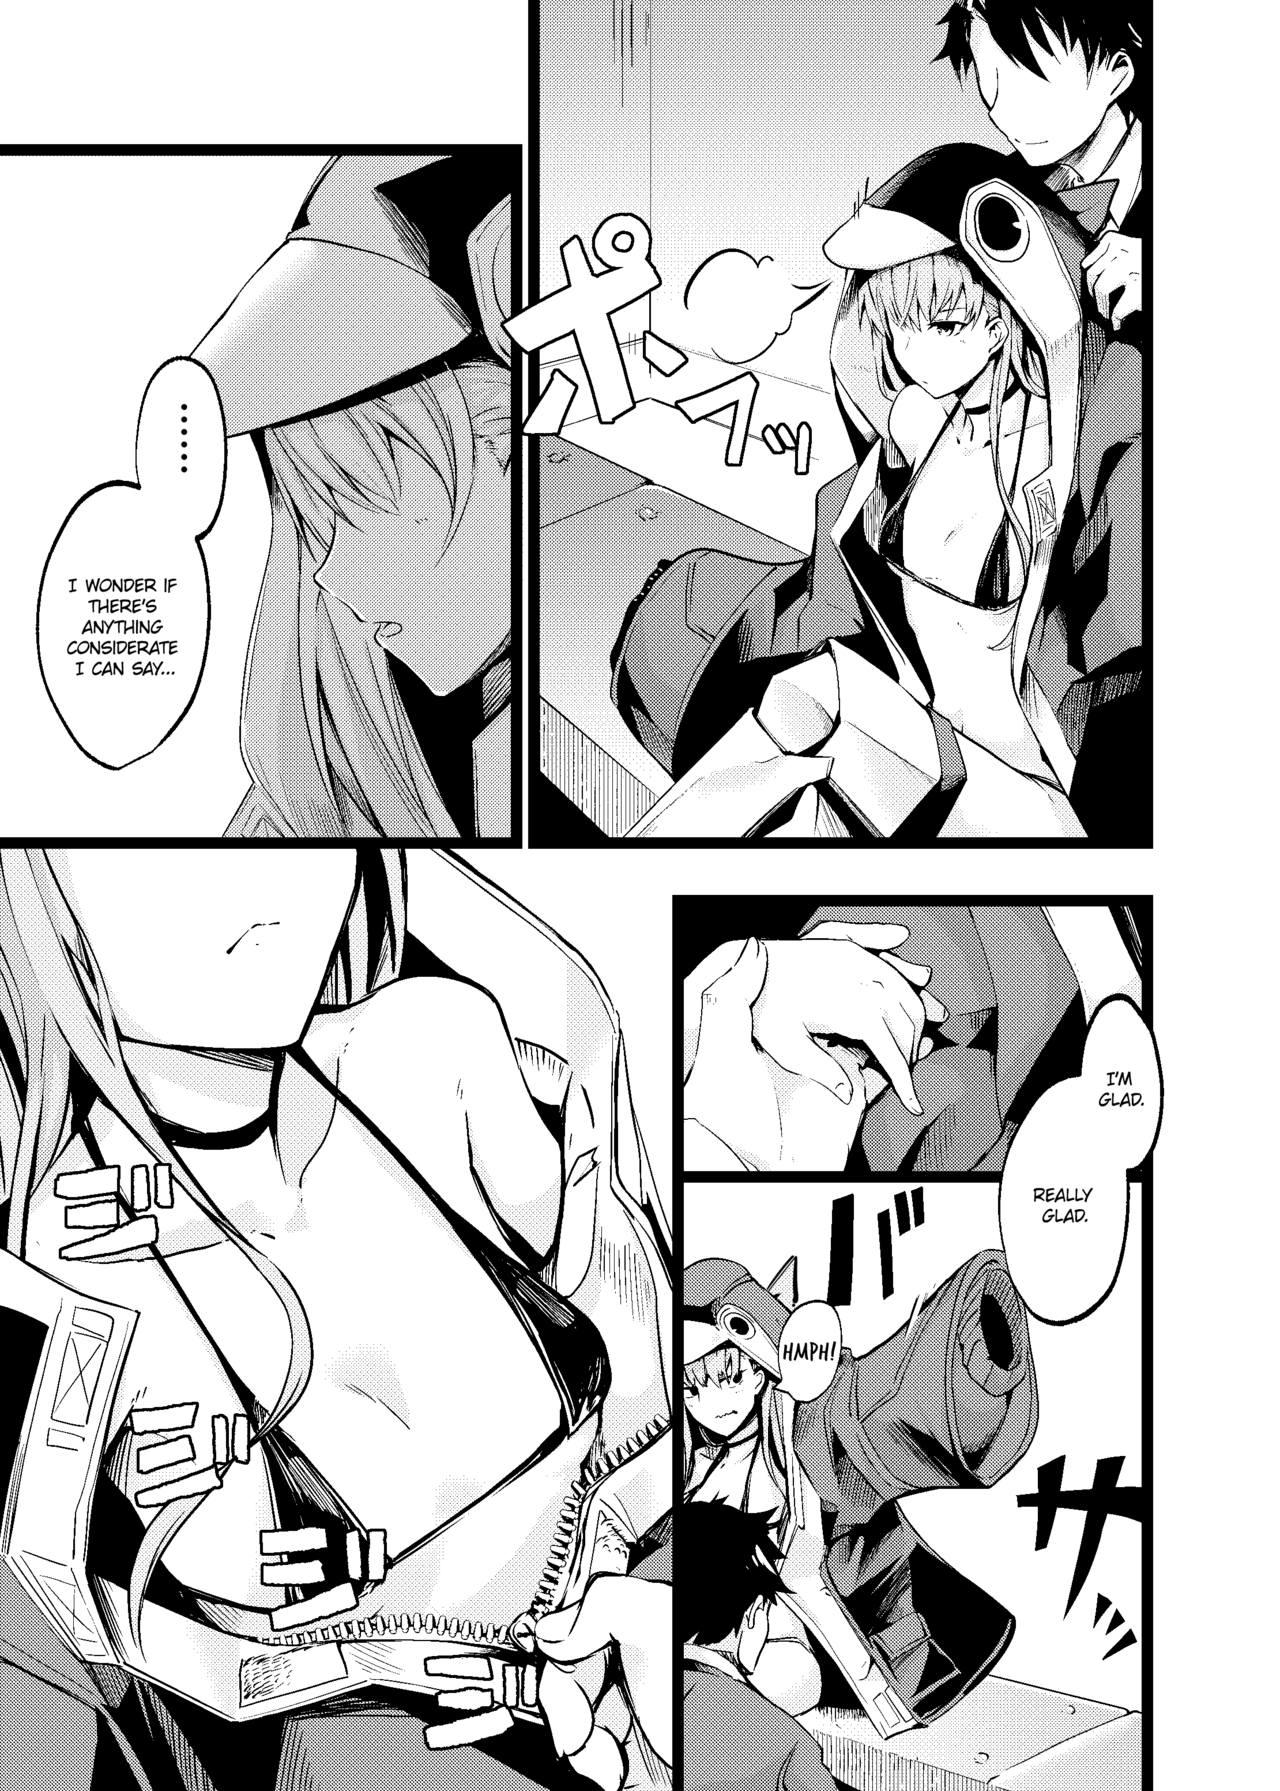 Ethnic Doing it with Meltryllis in her Swimsuit - Fate grand order Chat - Page 4